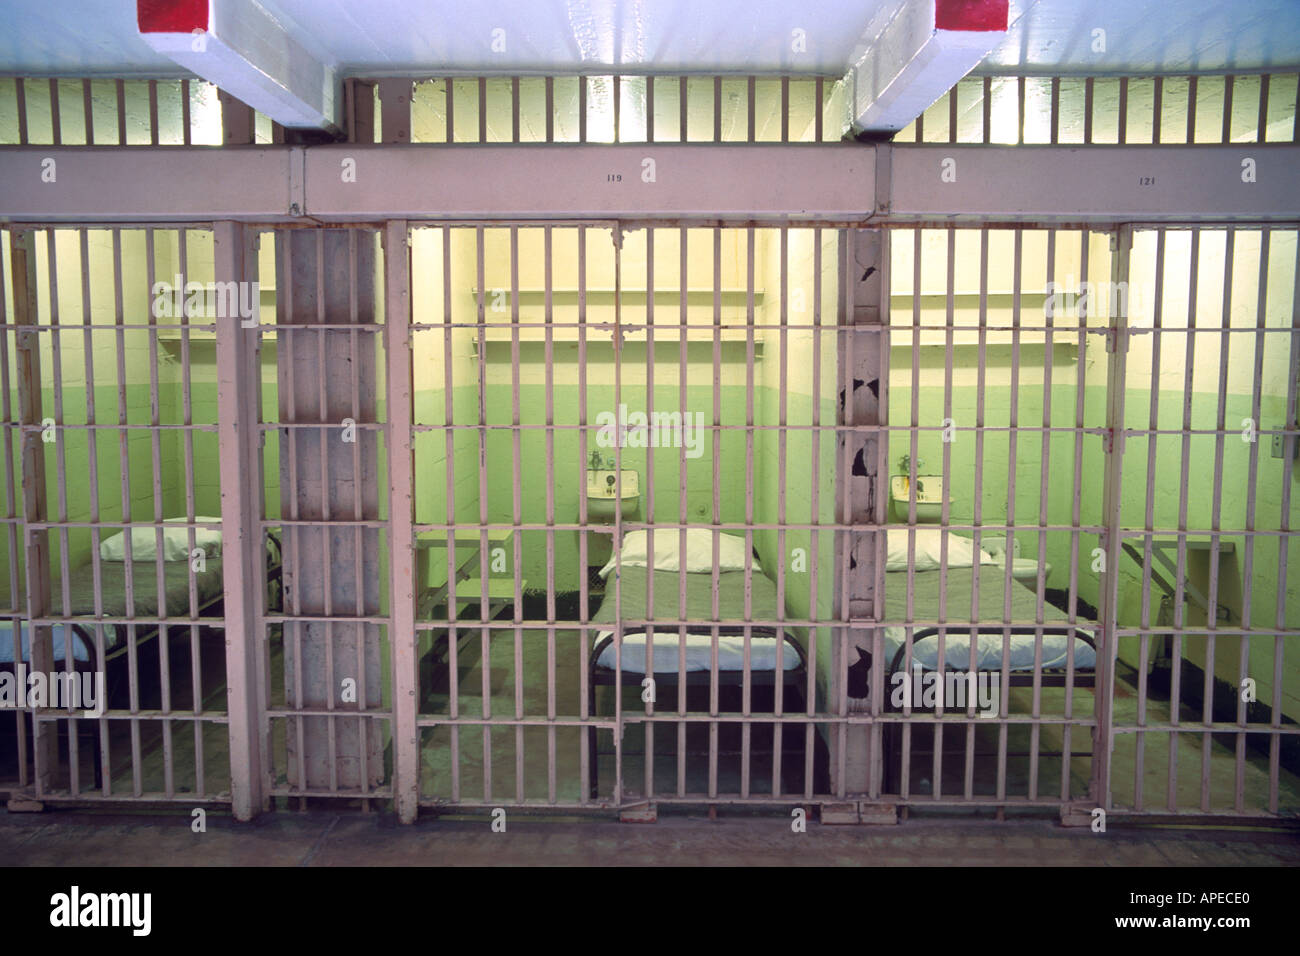 Iron Bars Door And Bed In Prisoner Jail Cell Row In Main Cellblock Stock Photo Alamy